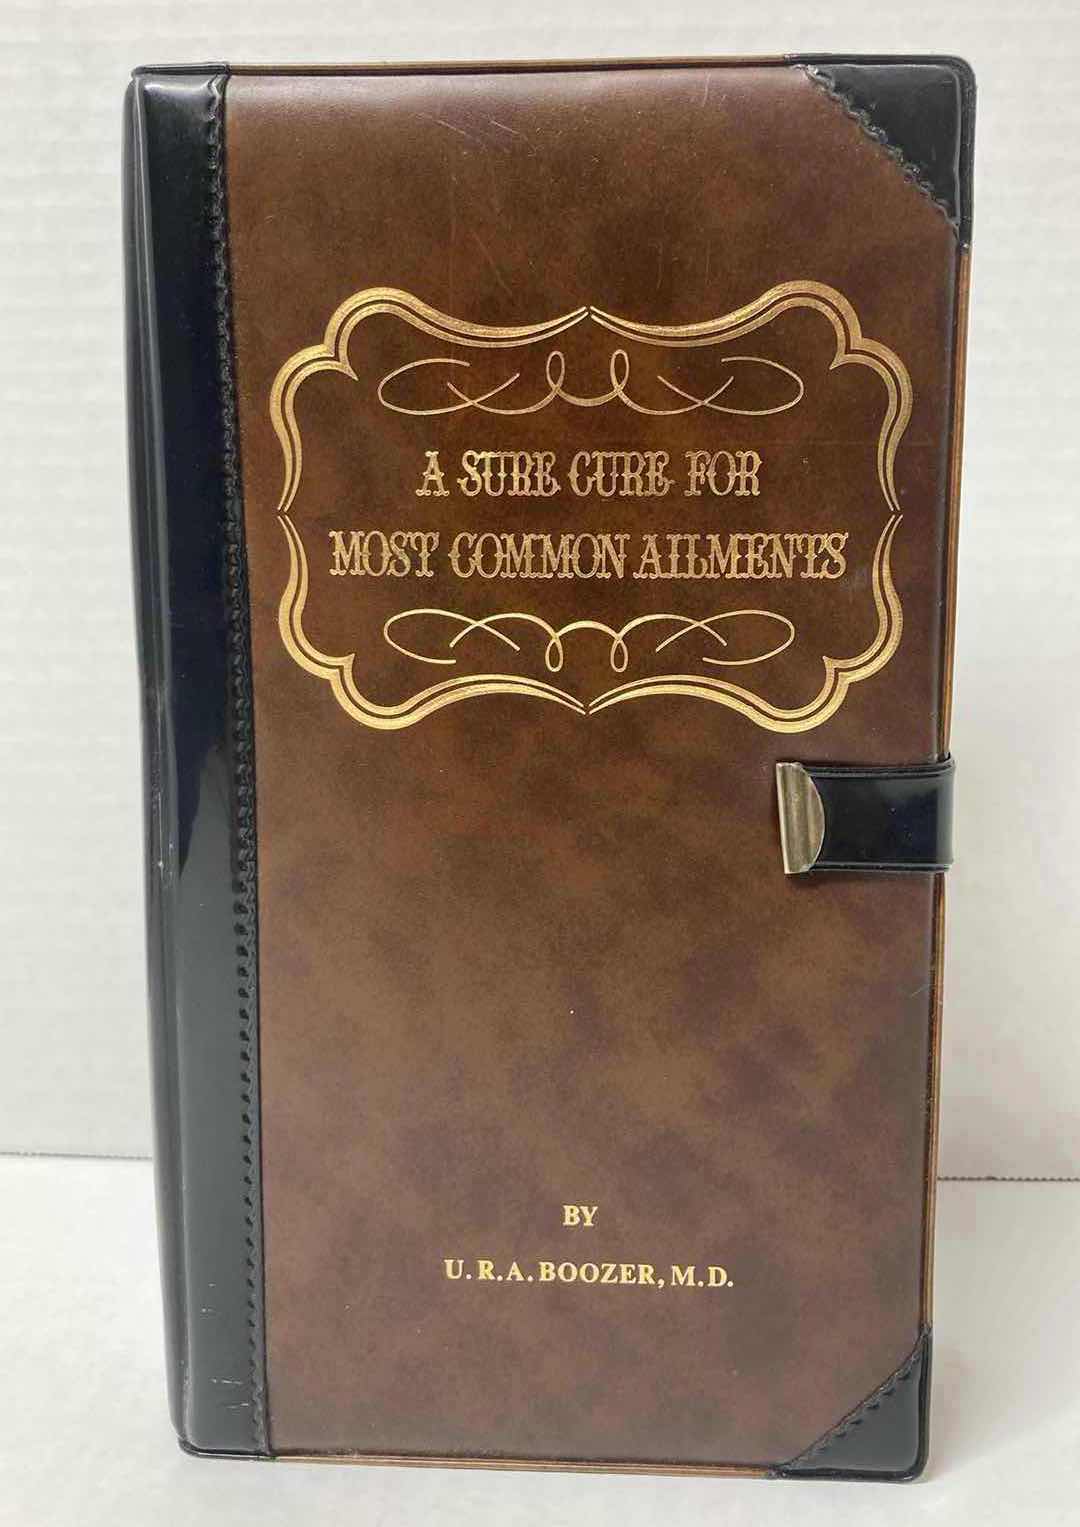 Photo 1 of U.R.A. BOOZER M.D. NOVELTY BOOK BAR FLASK “ A SURE CURE FOR MOST COMMON AILMENTS”